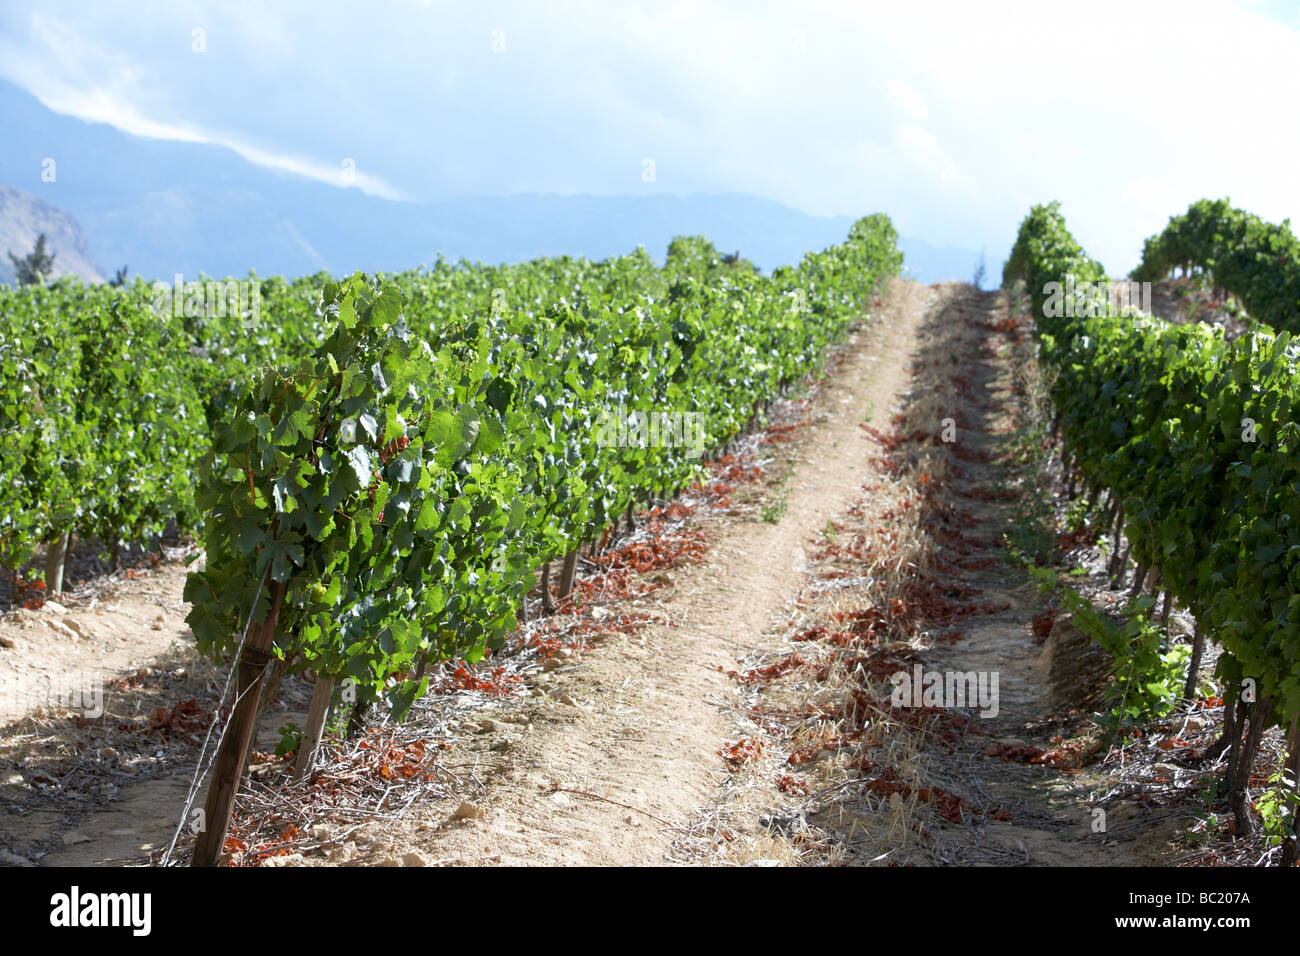 View Of South African Vineyard Stock Photo